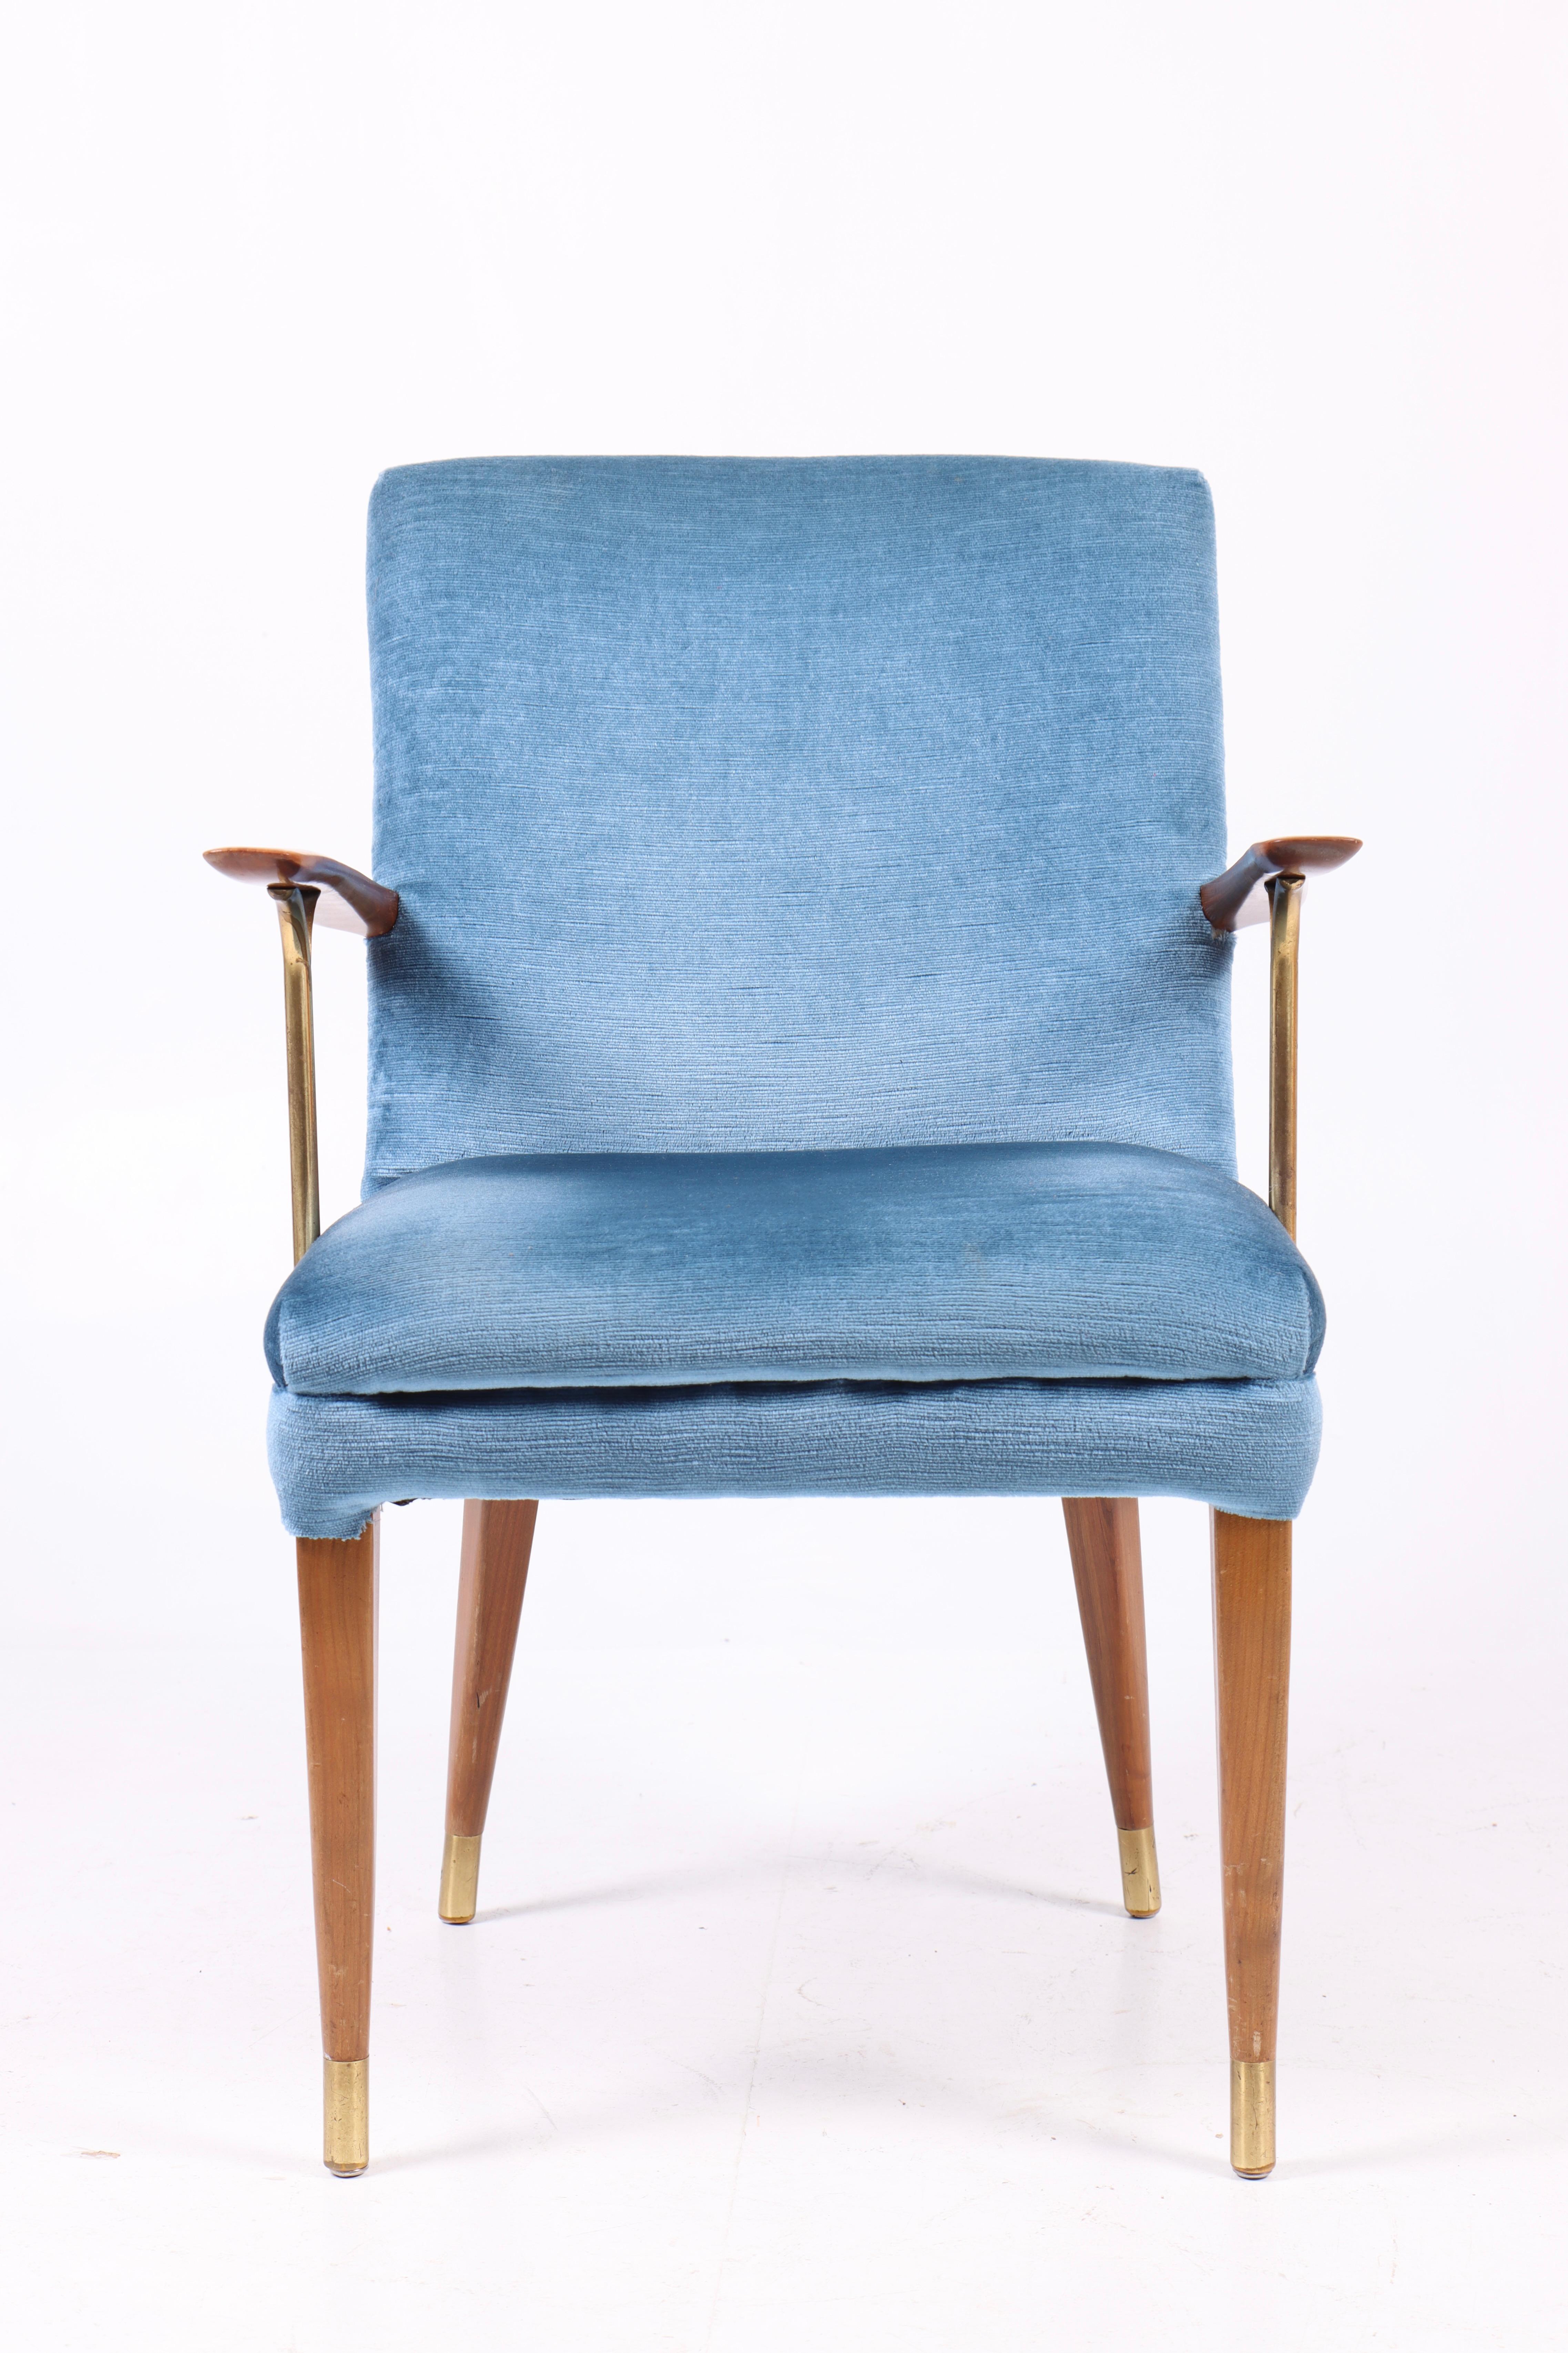 Armchair in fabric with brass details. Designed and made in Sweden 1950s.